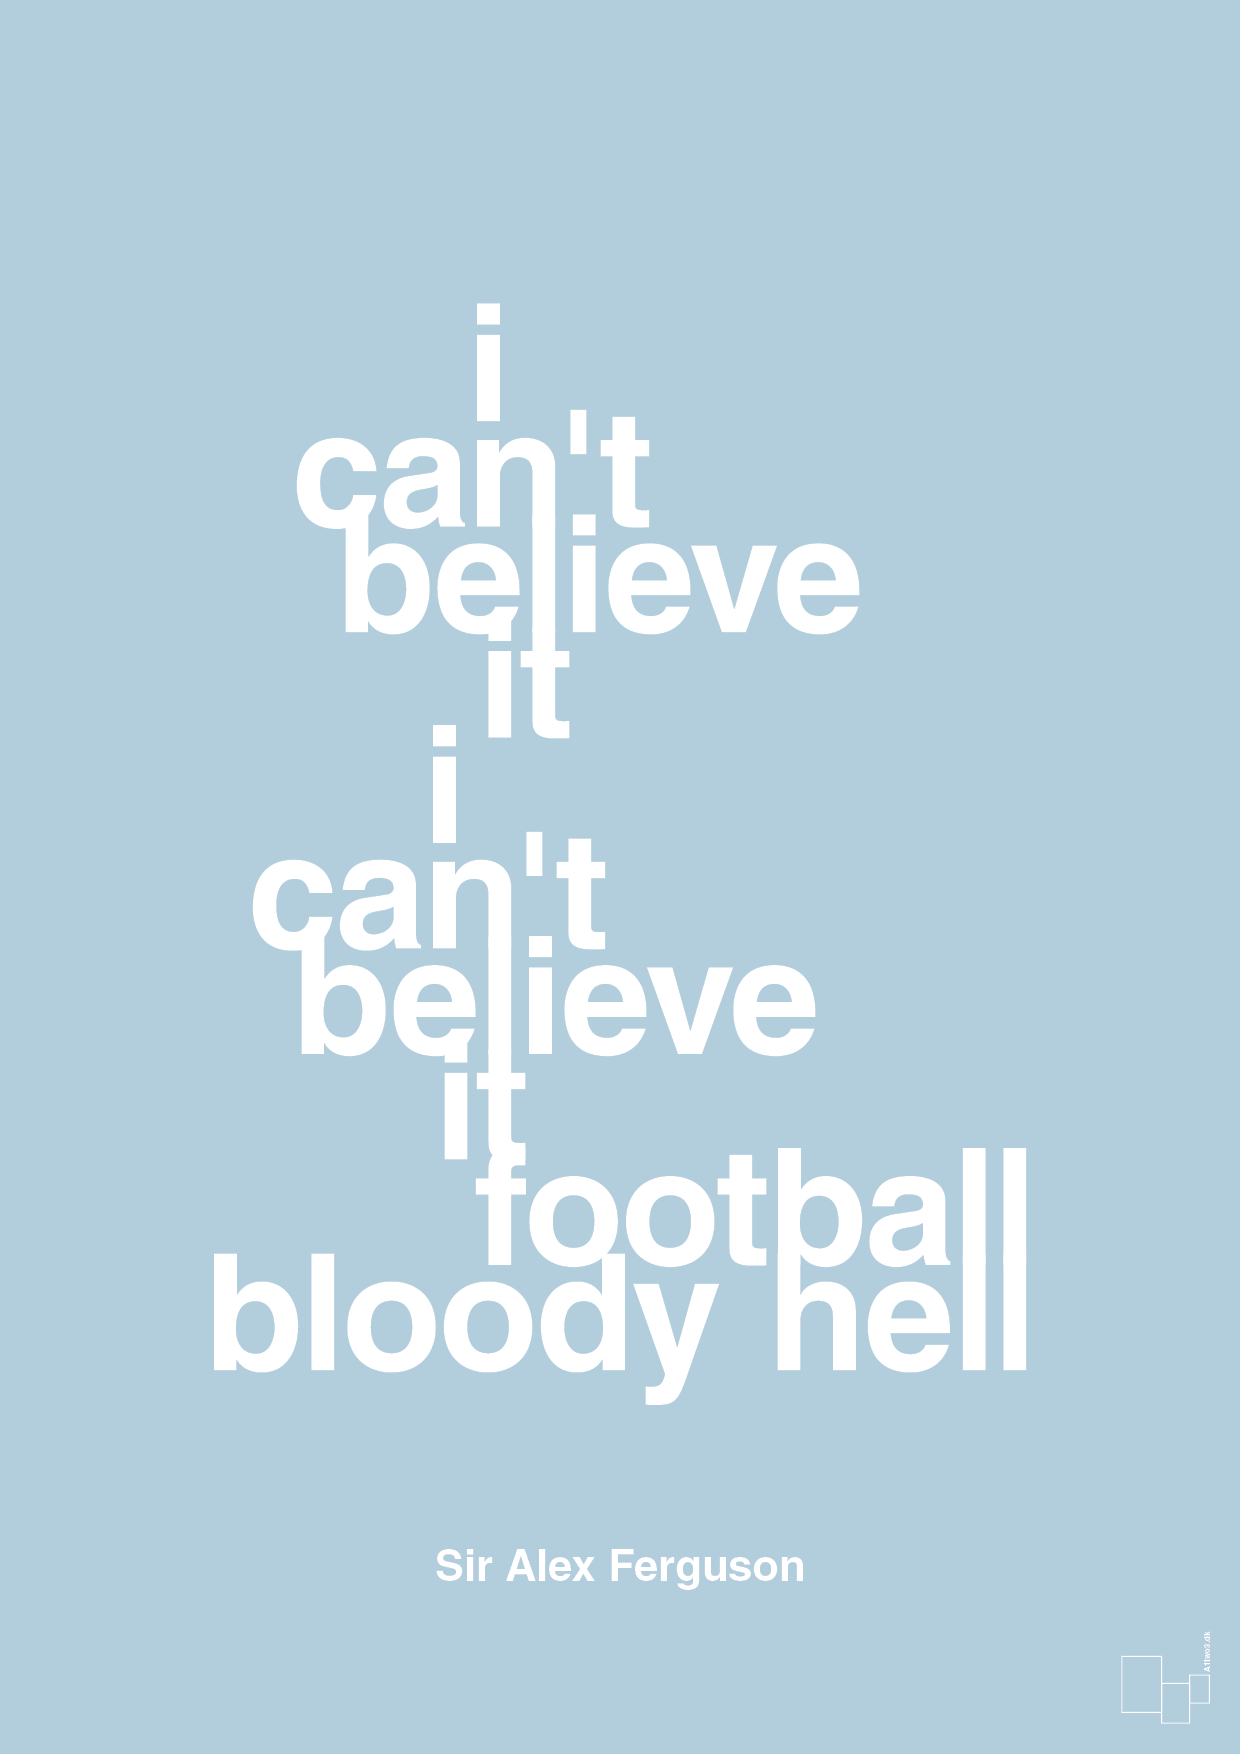 i can't believe it i can't believe it football bloody hell - Plakat med Citater i Heavenly Blue